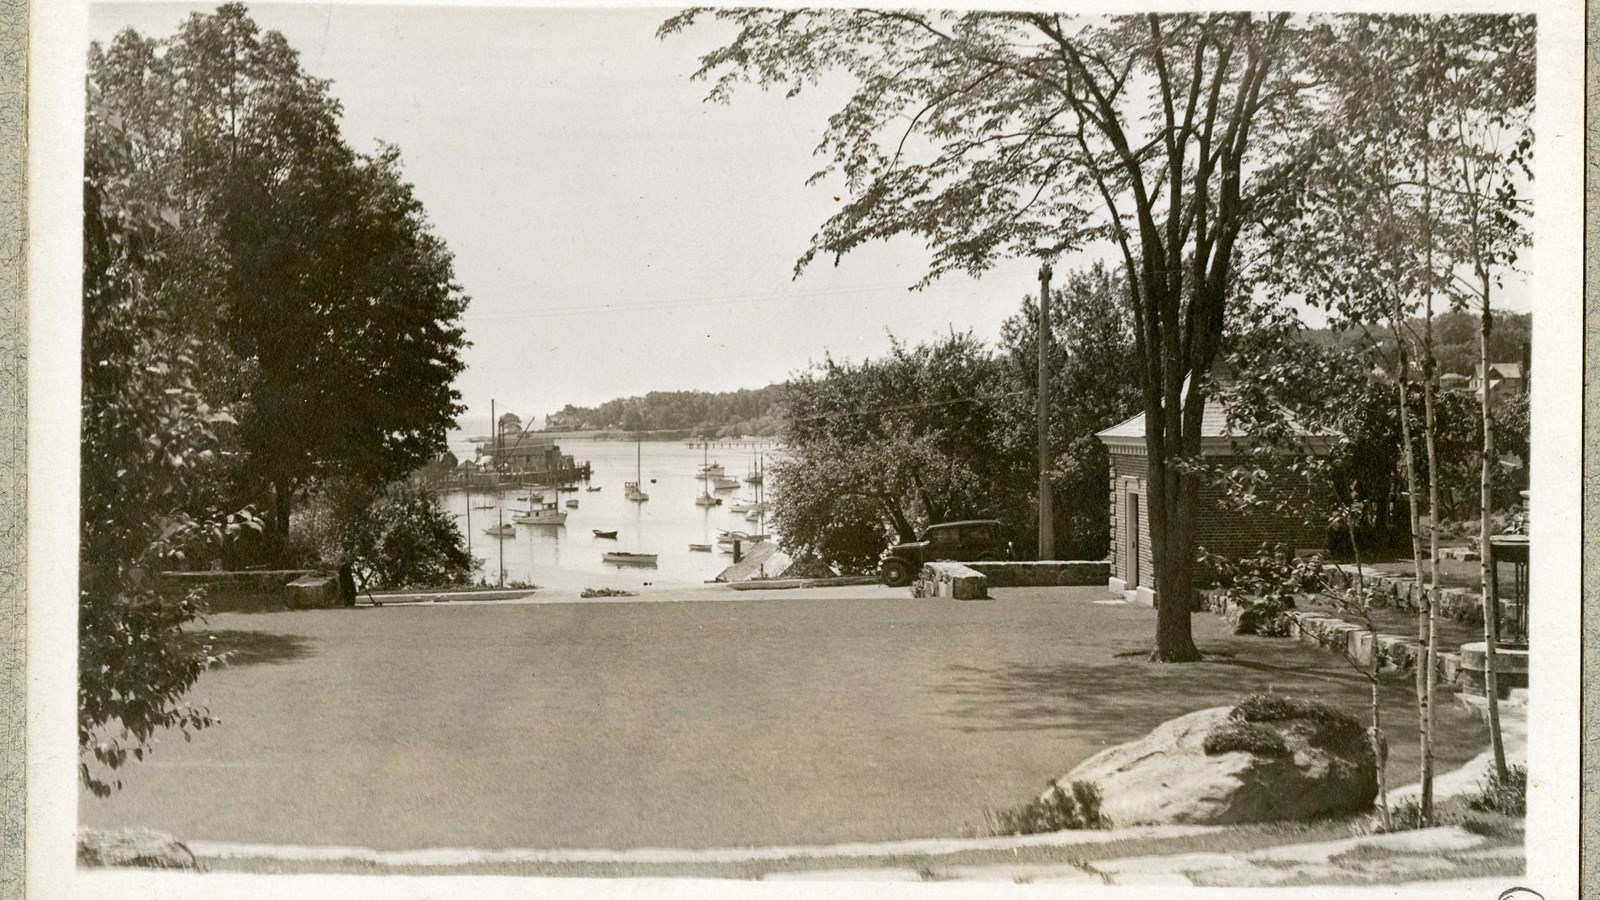 Black and white of flat grassy area with trees on edges overlooking harbor with boats on it